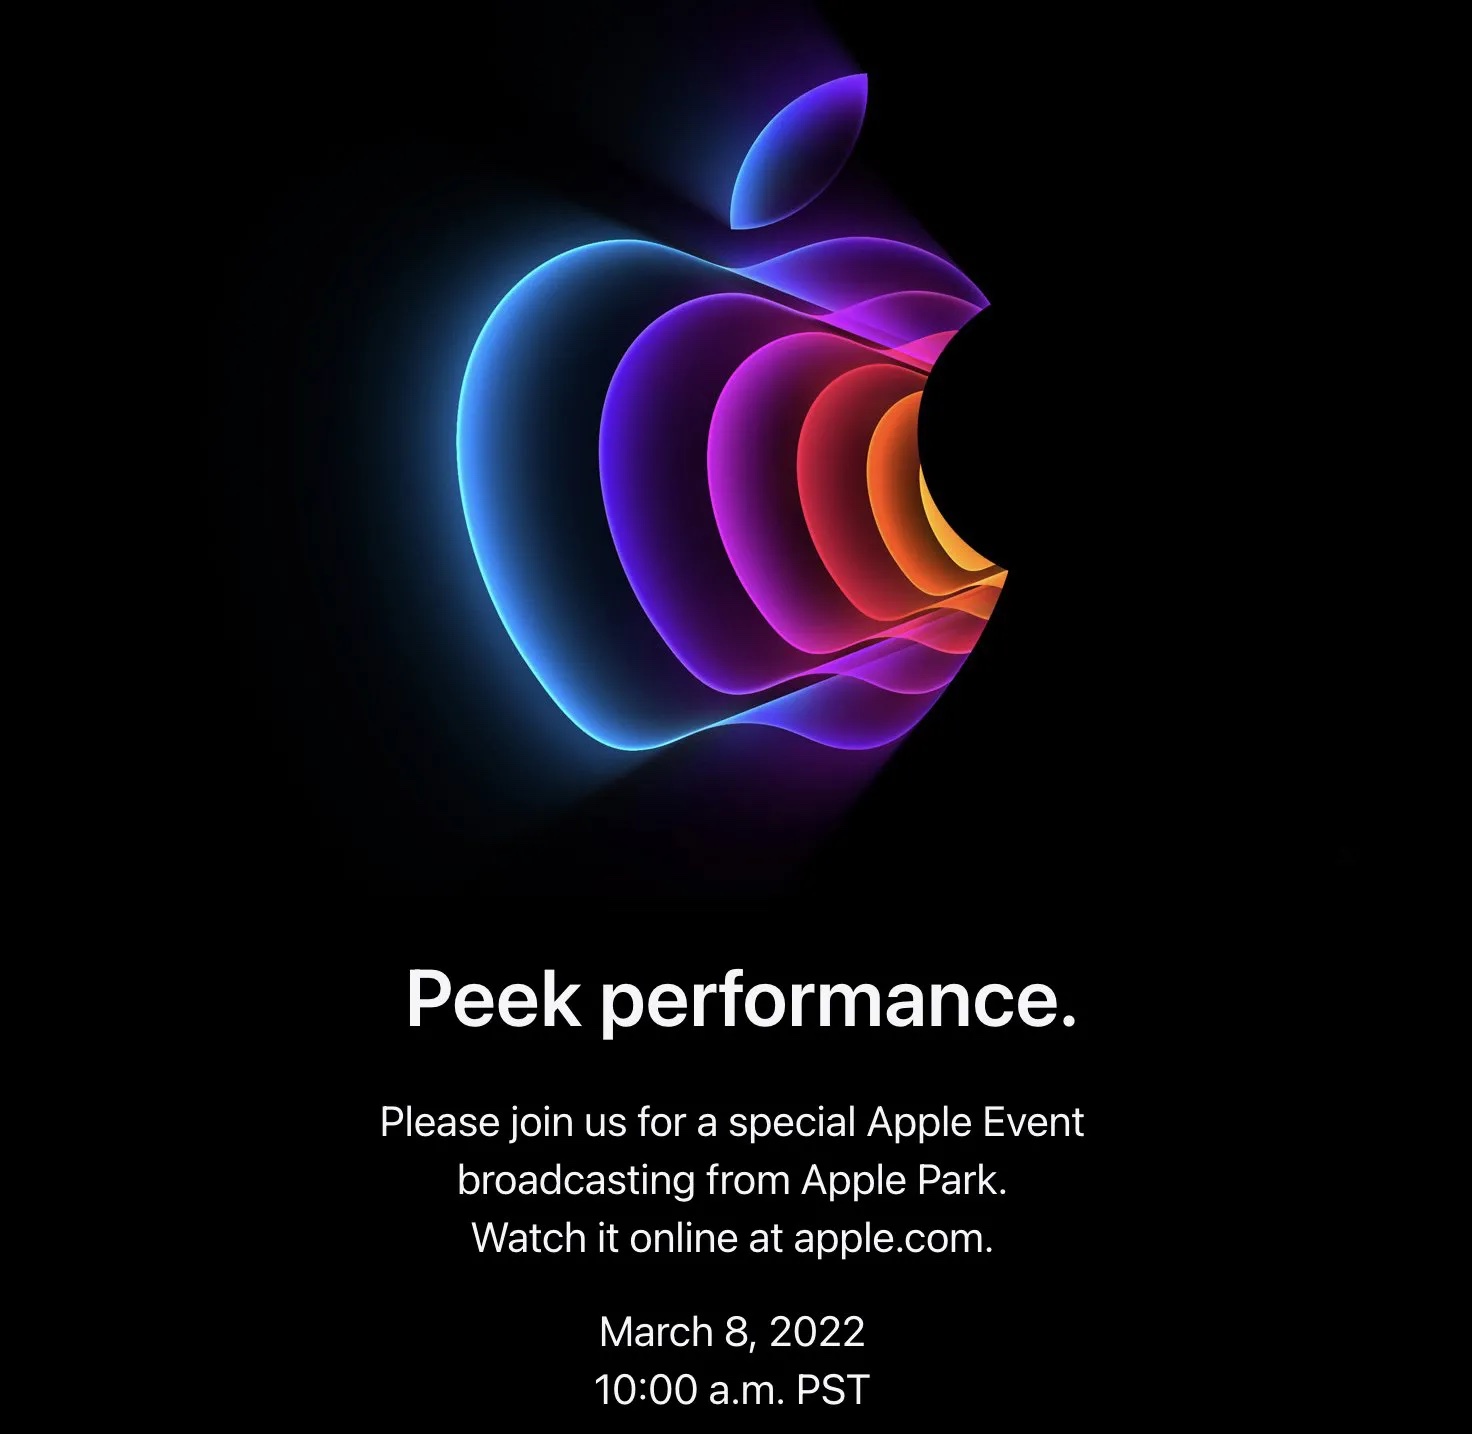 The 'Peek Performance' event will take place on March 8th, according to Apple